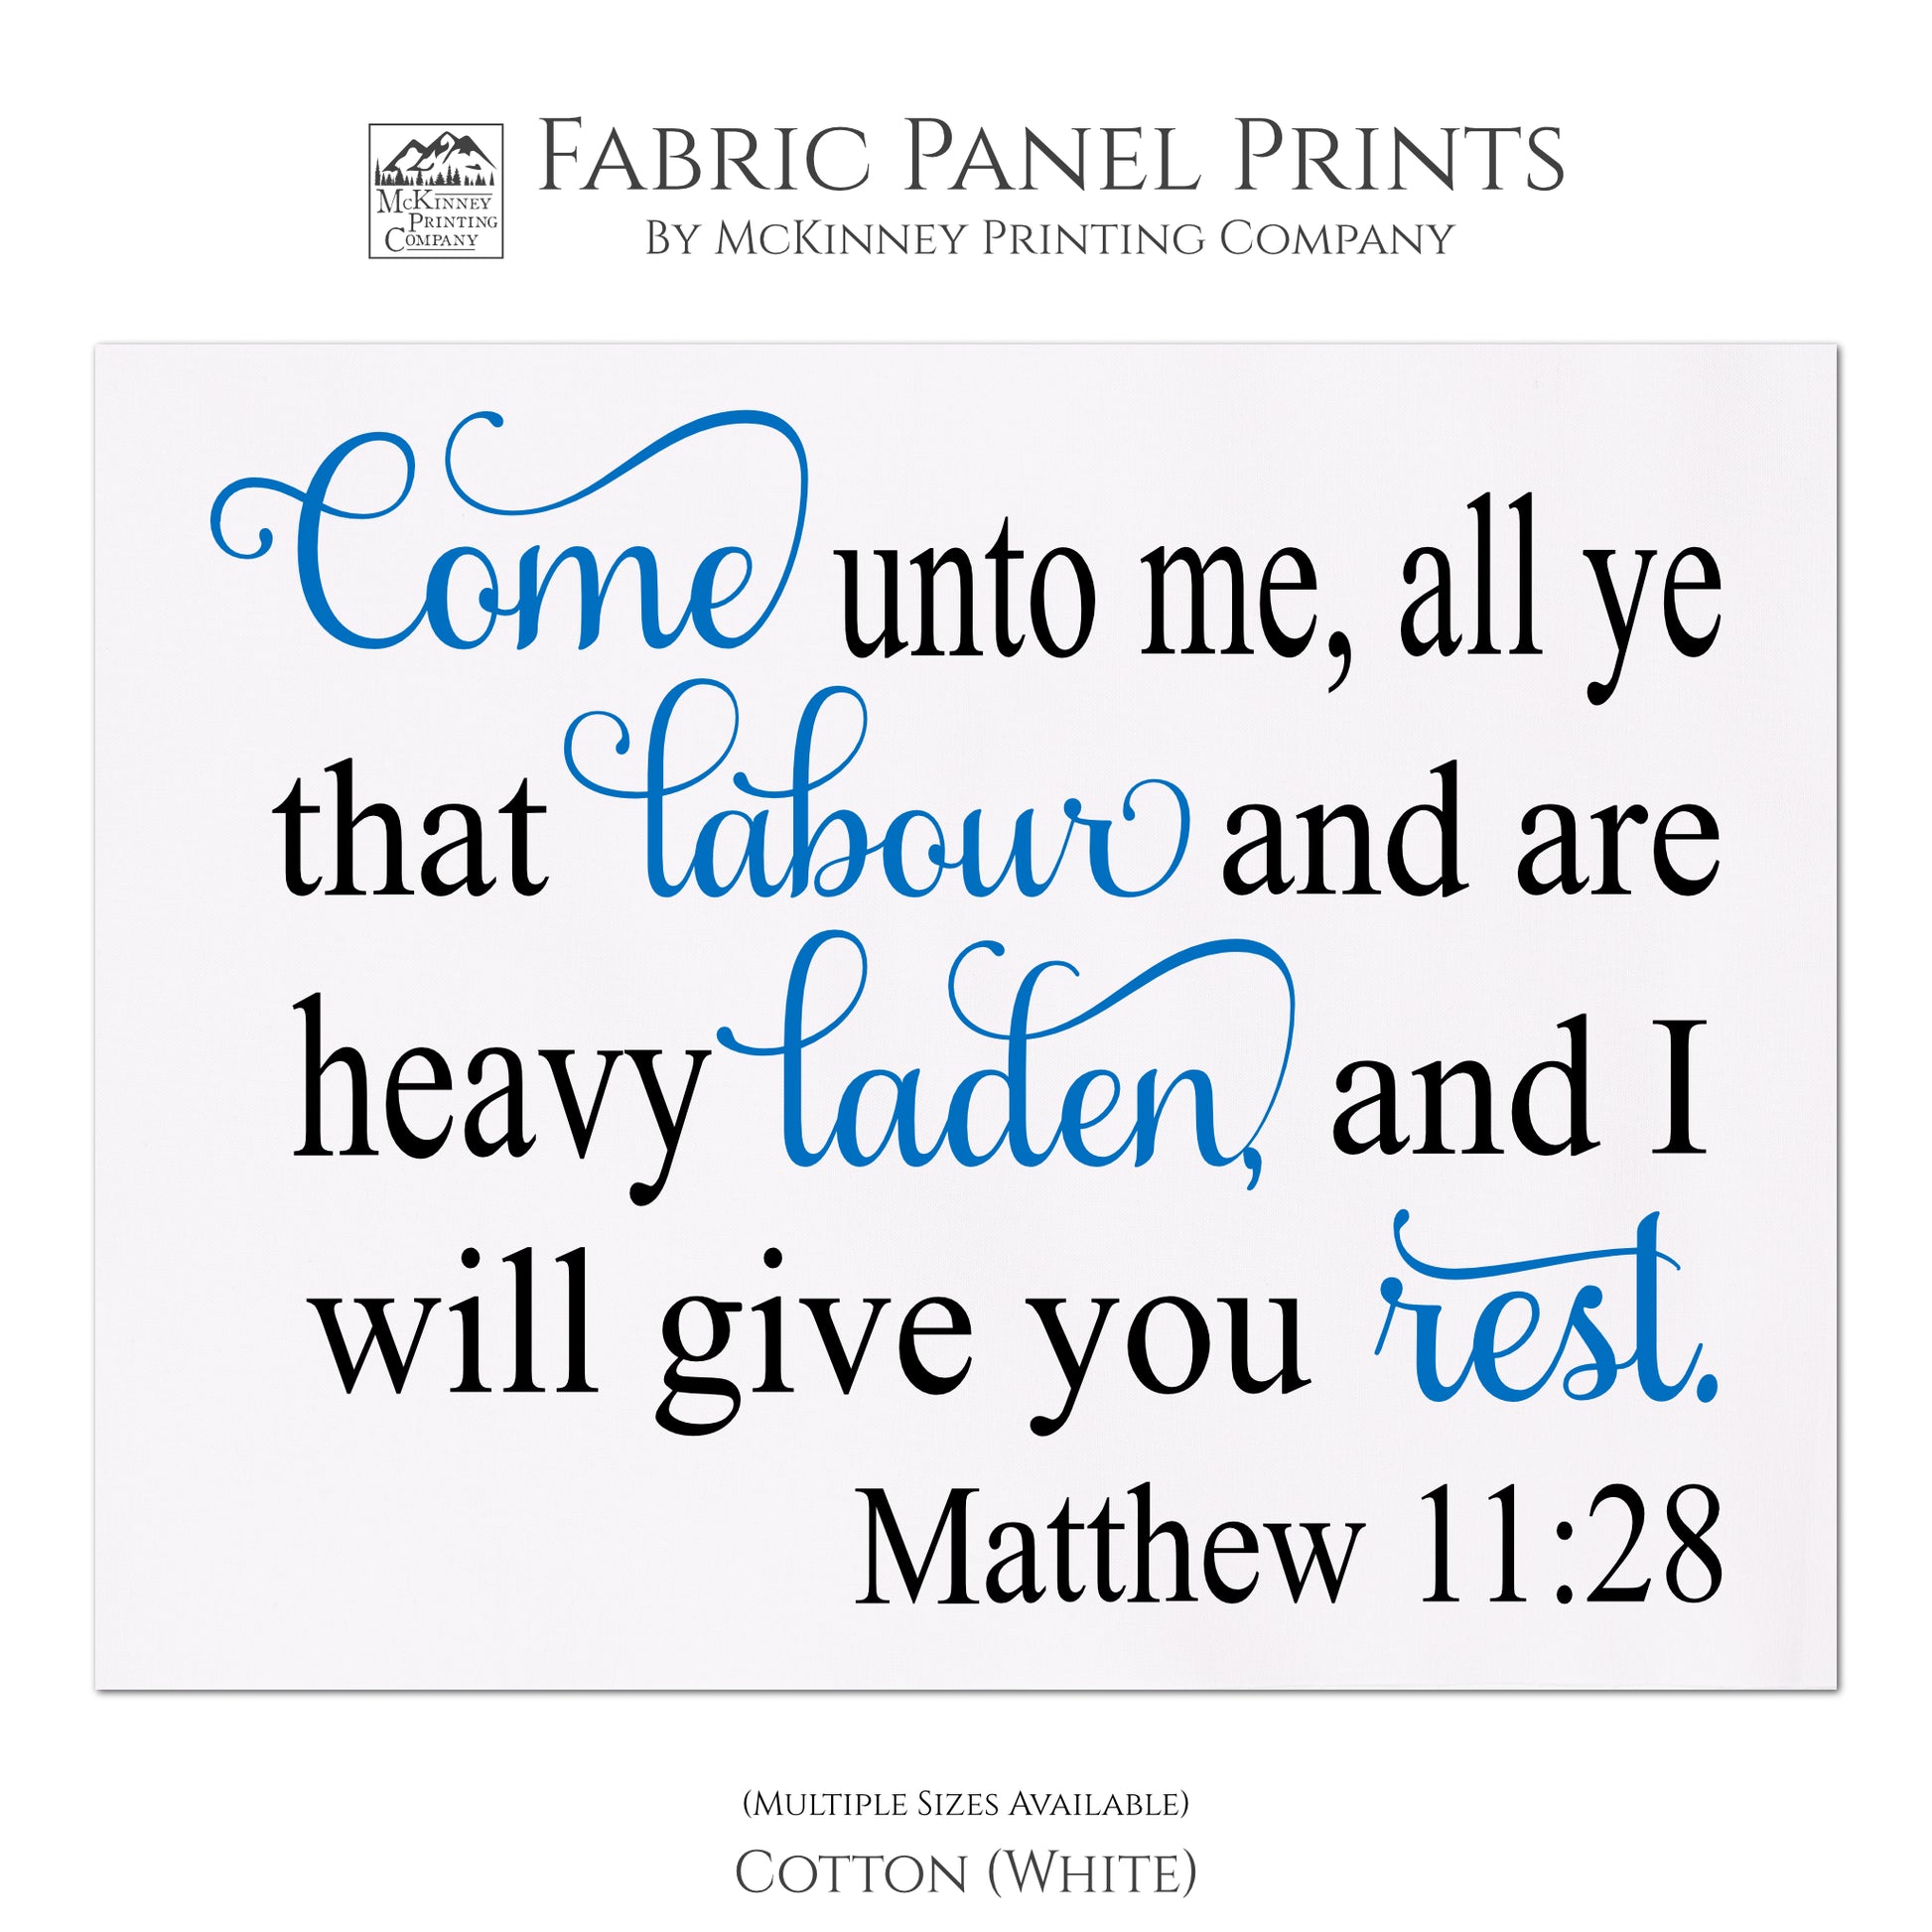 Come unto me, all ye that labor and are heavy laden, and I will give you rest - Matthew 11:28 - Fabric Panel Print, Quilt Block, Wall Art - Cotton, White